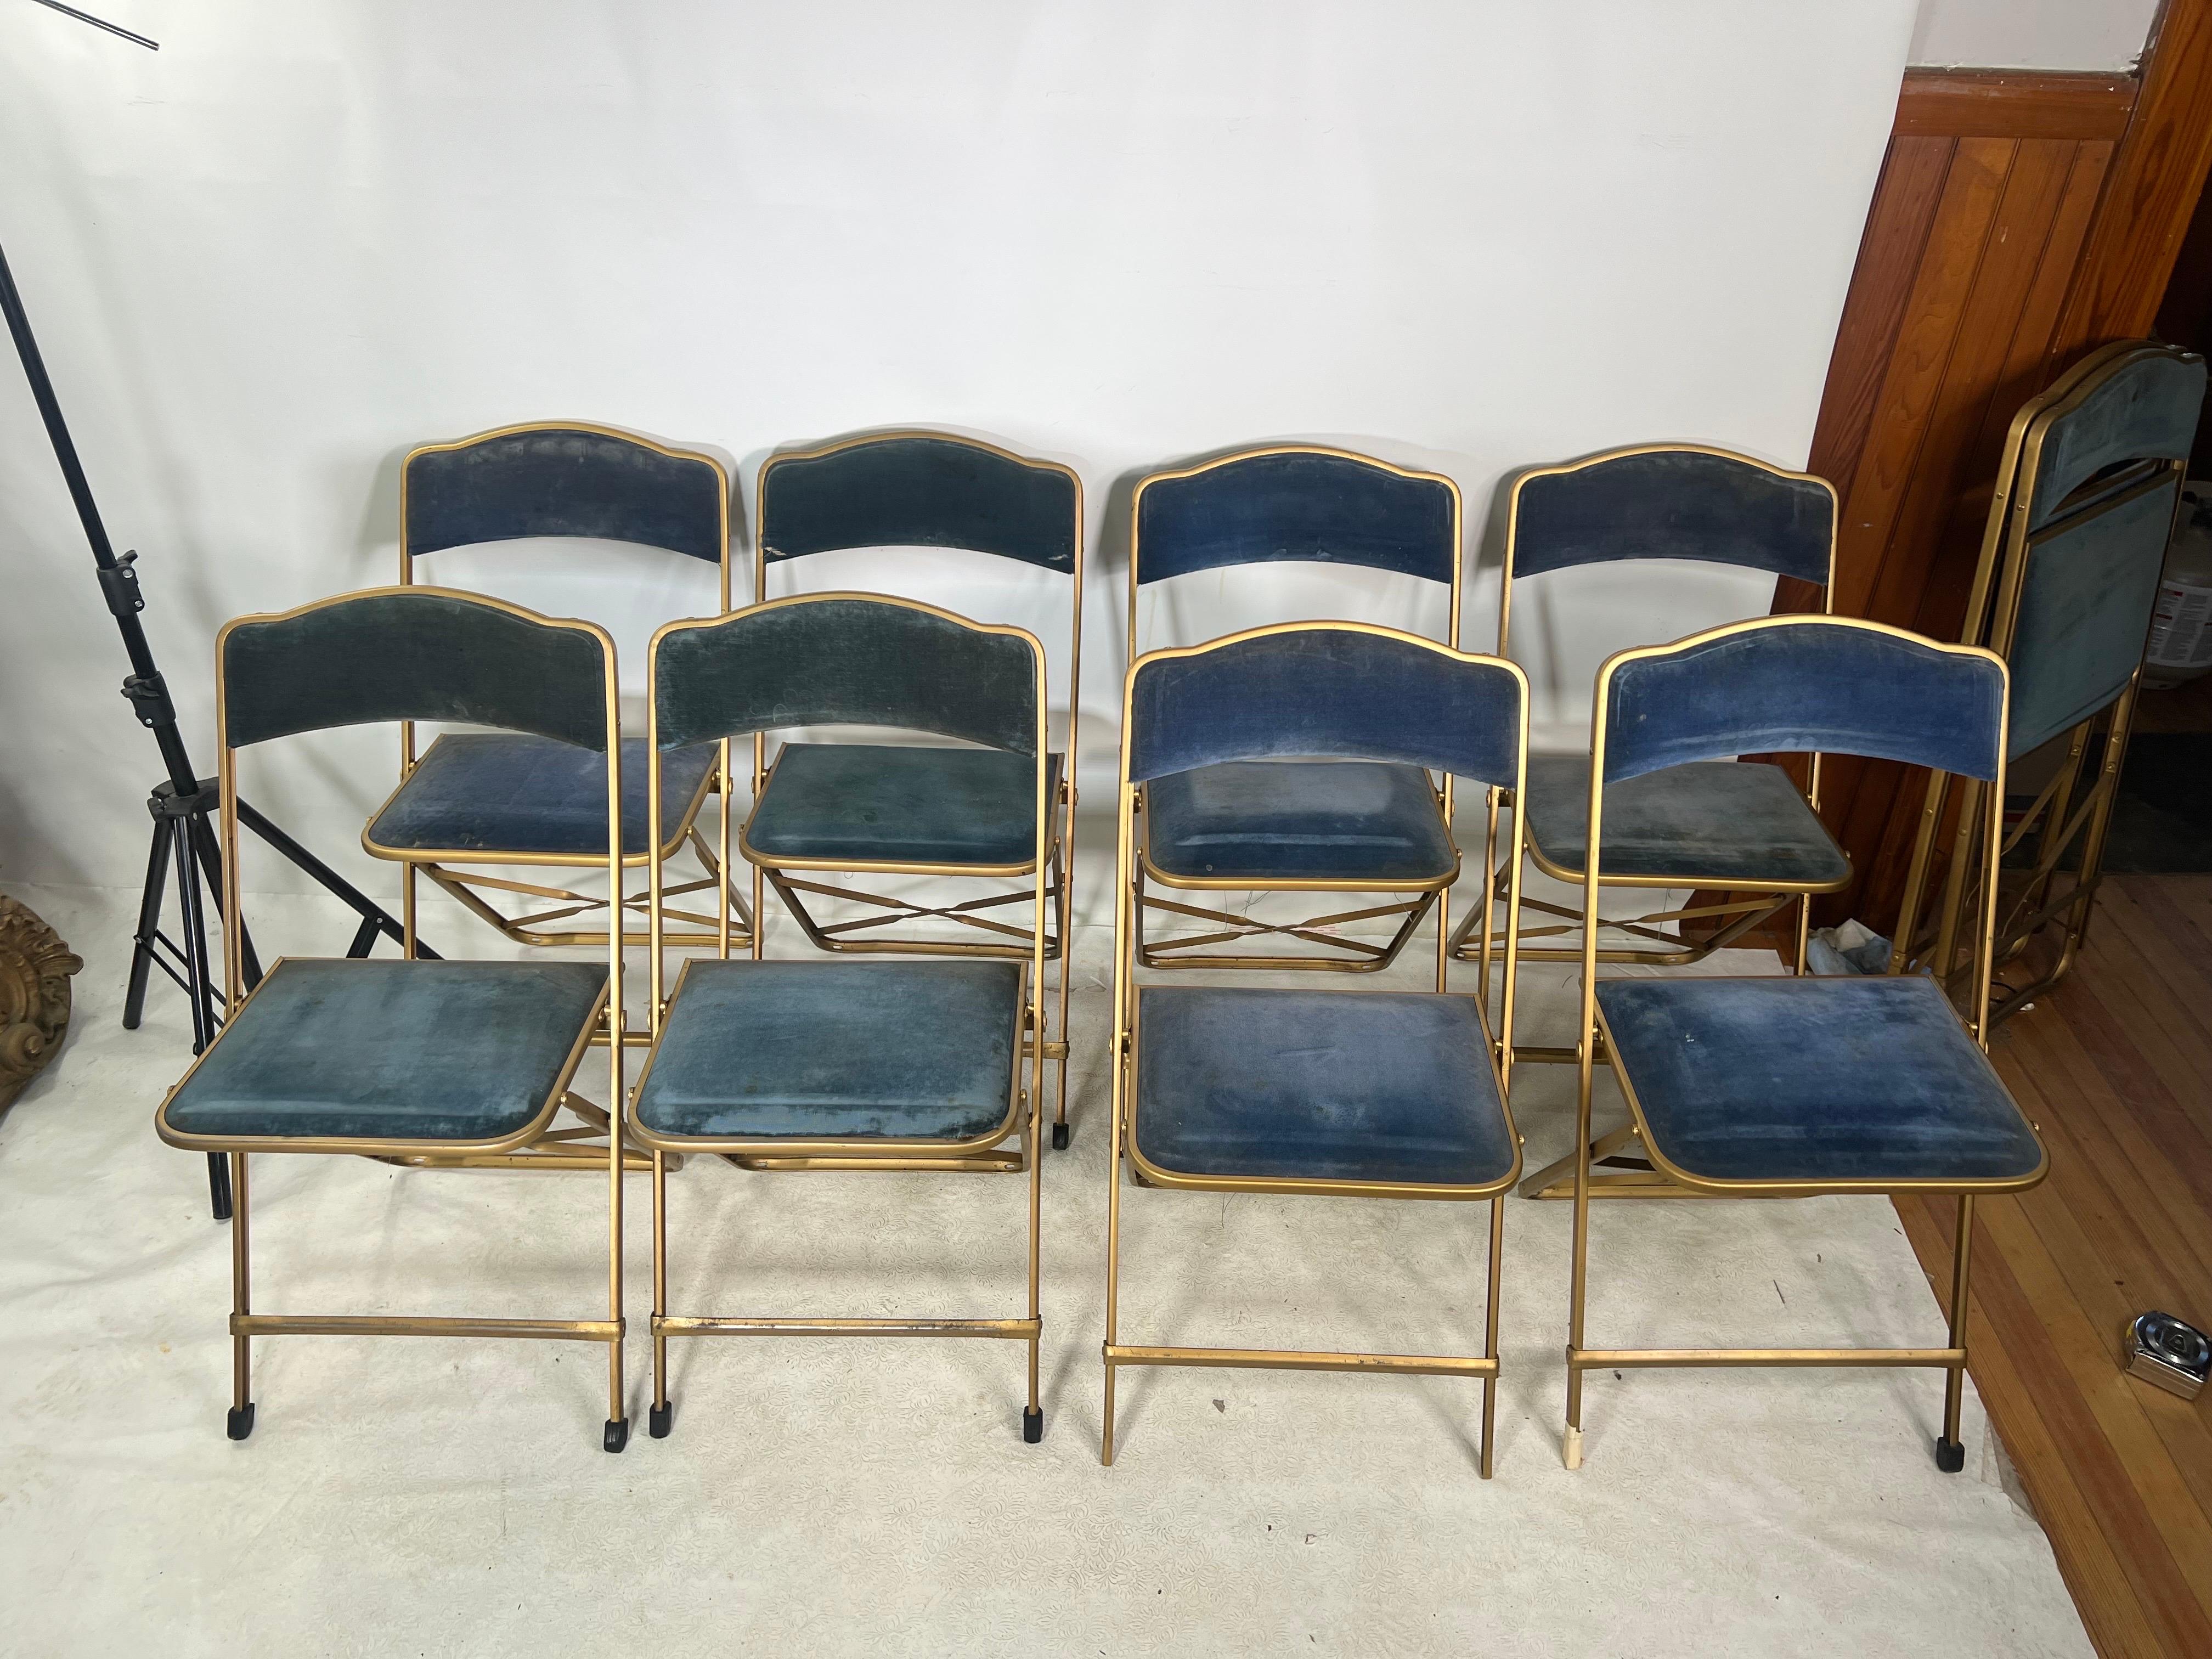 a fritz folding chairs